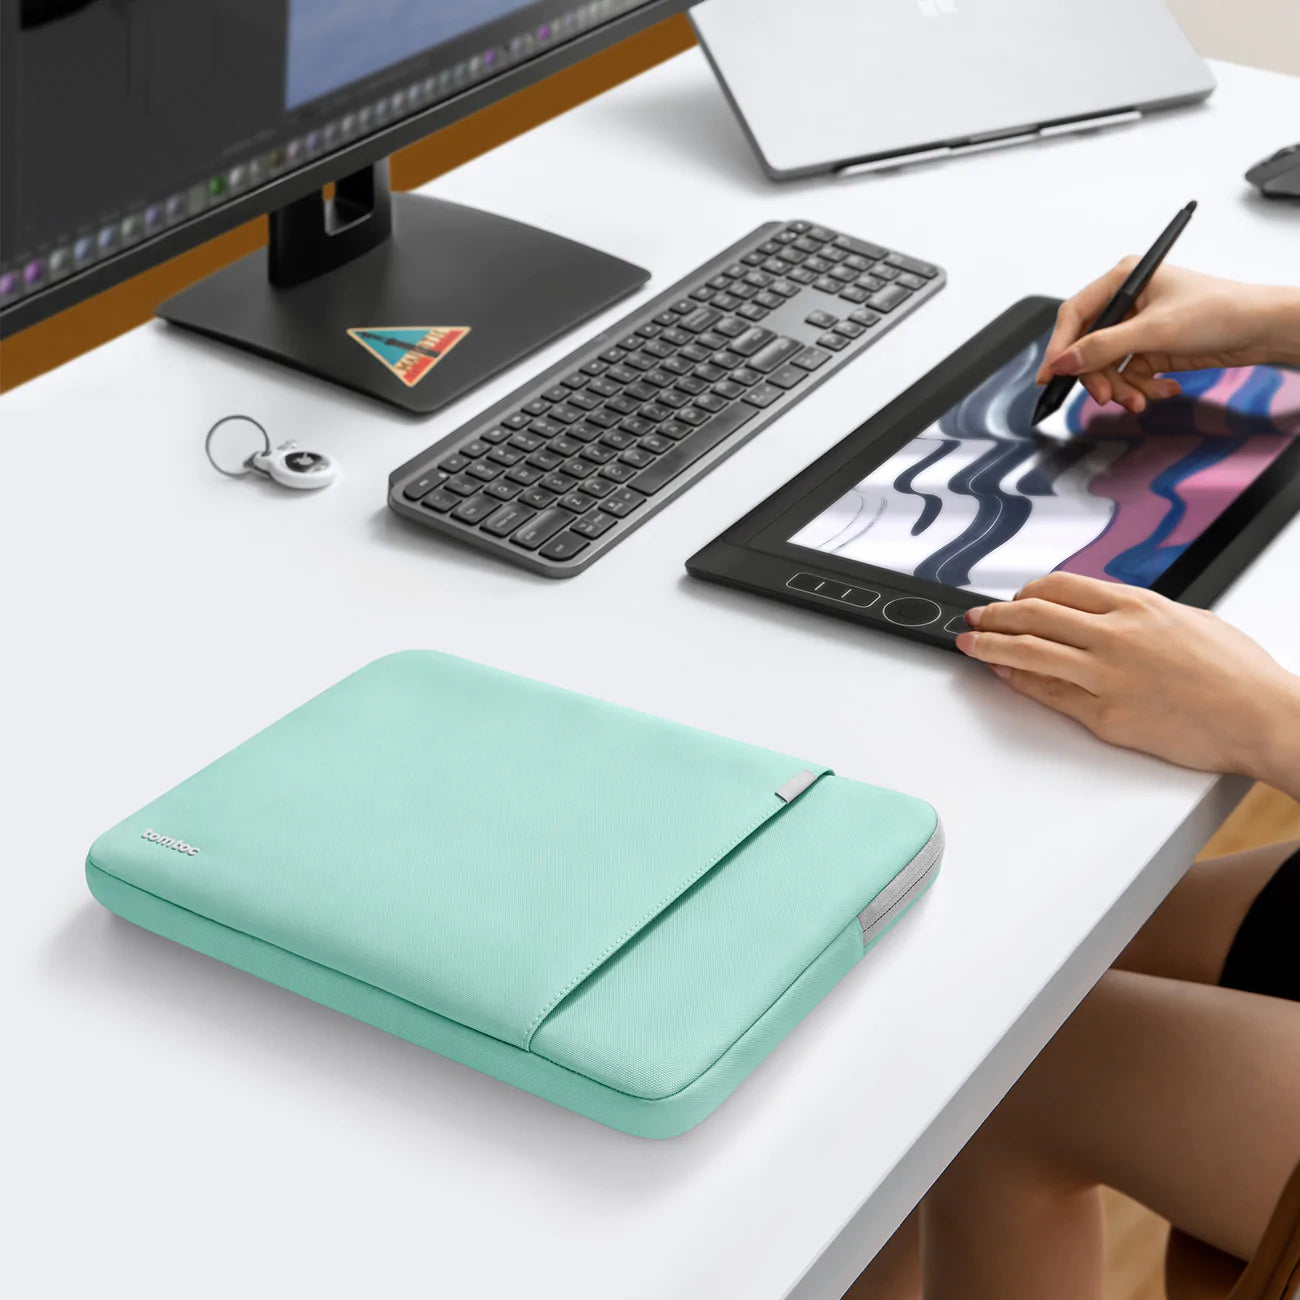 Defender-A13 Laptop Sleeve for 14 Inch MacBook Pro | Mint Blue